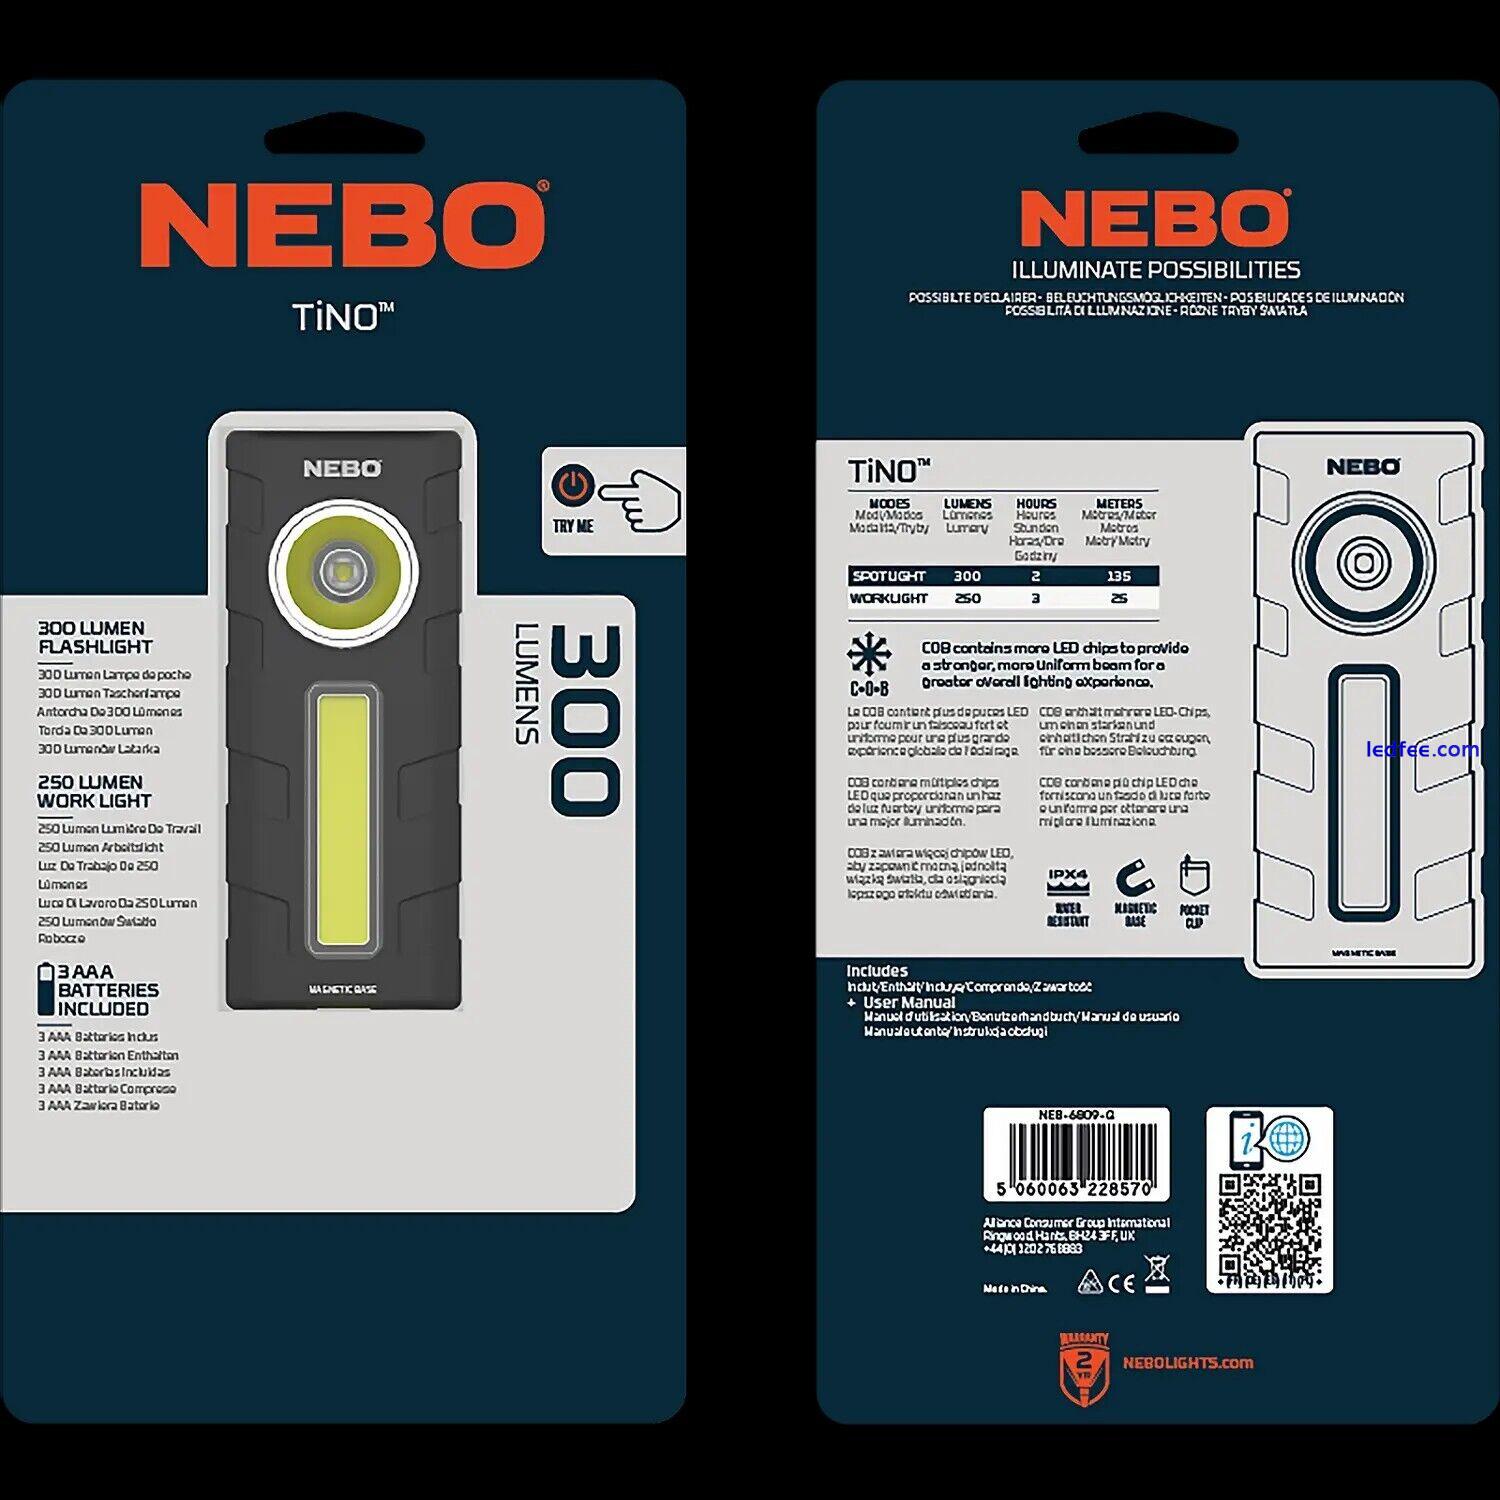 NEBO TINO - 300 LUMEN POCKET LIGHT- TORCH AND WORKLIGHT AAA BATTERY POWERED 0 